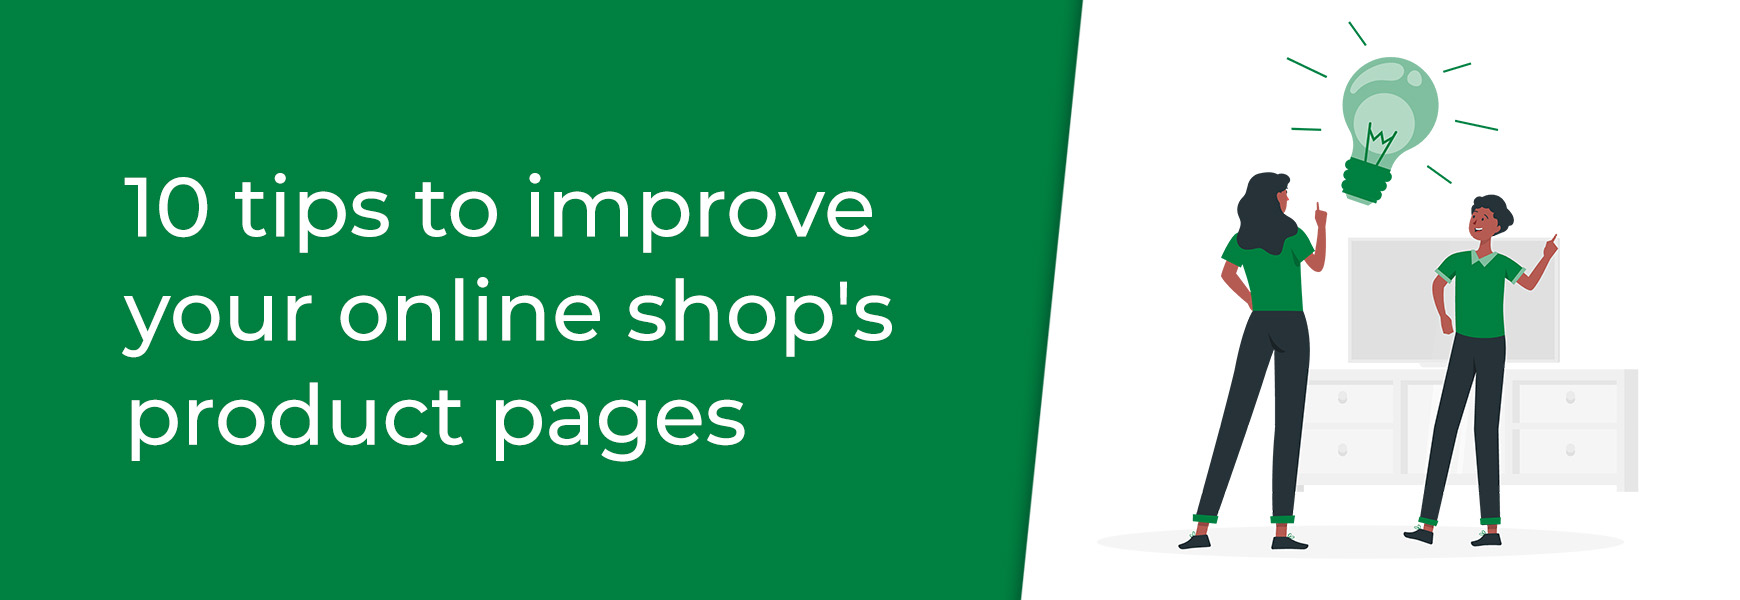 10 tips to improve your online shop's product pages